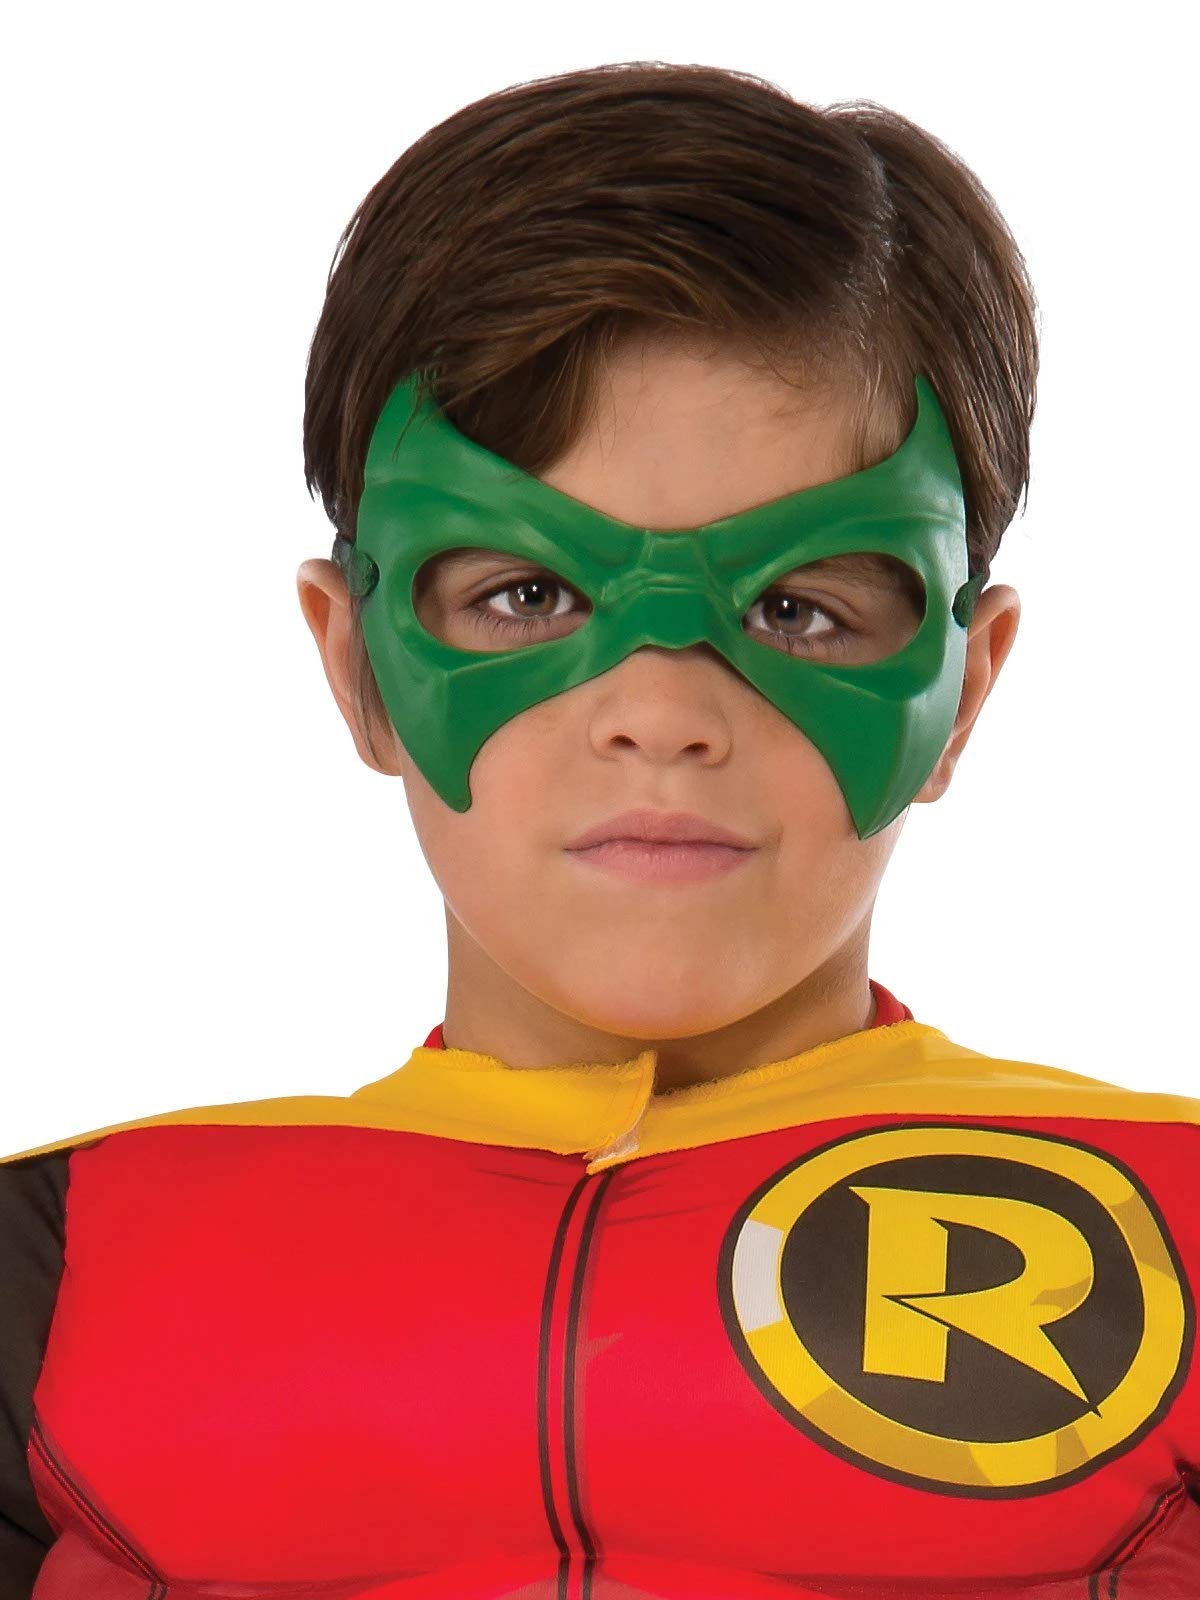 DC Superheroes Deluxe Robin Costume, Child's Large